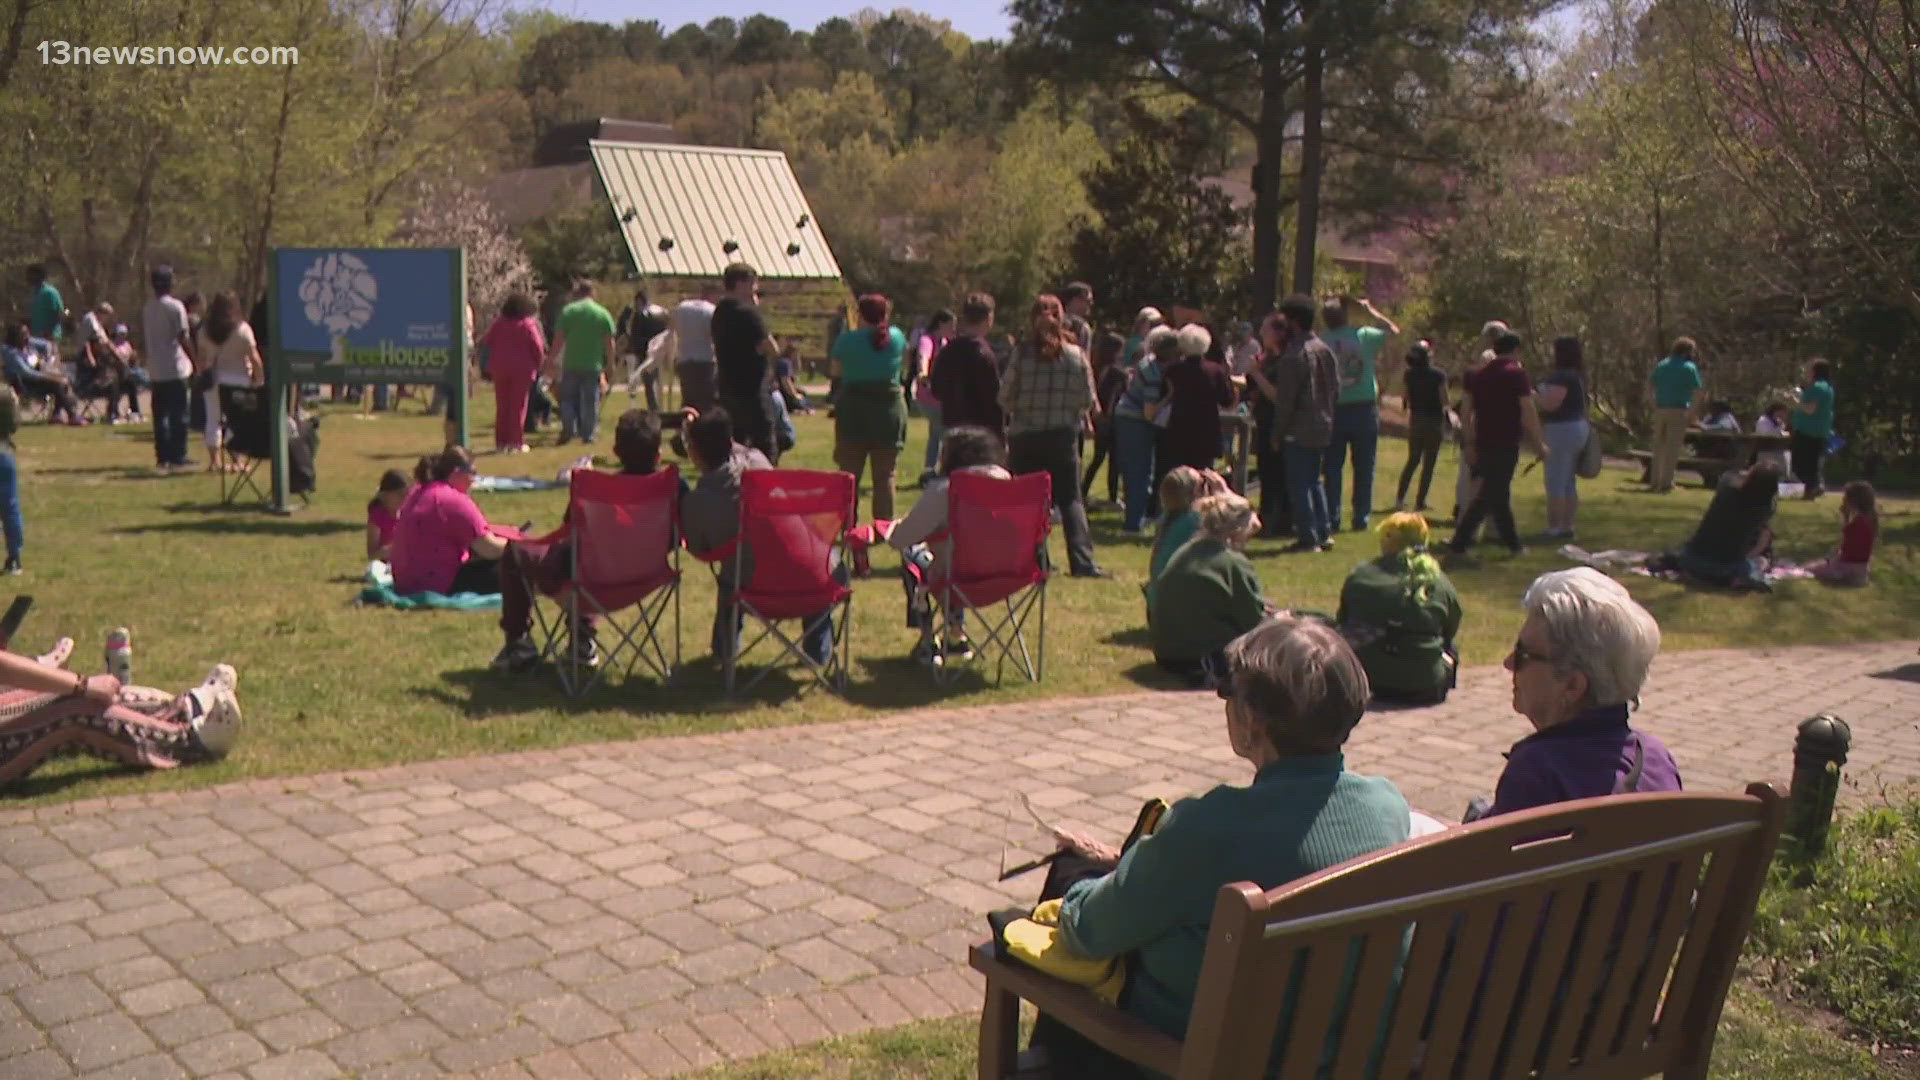 Virginia Living Museum invited viewers to gather on the Conservation Lawn to witness the eclipse.